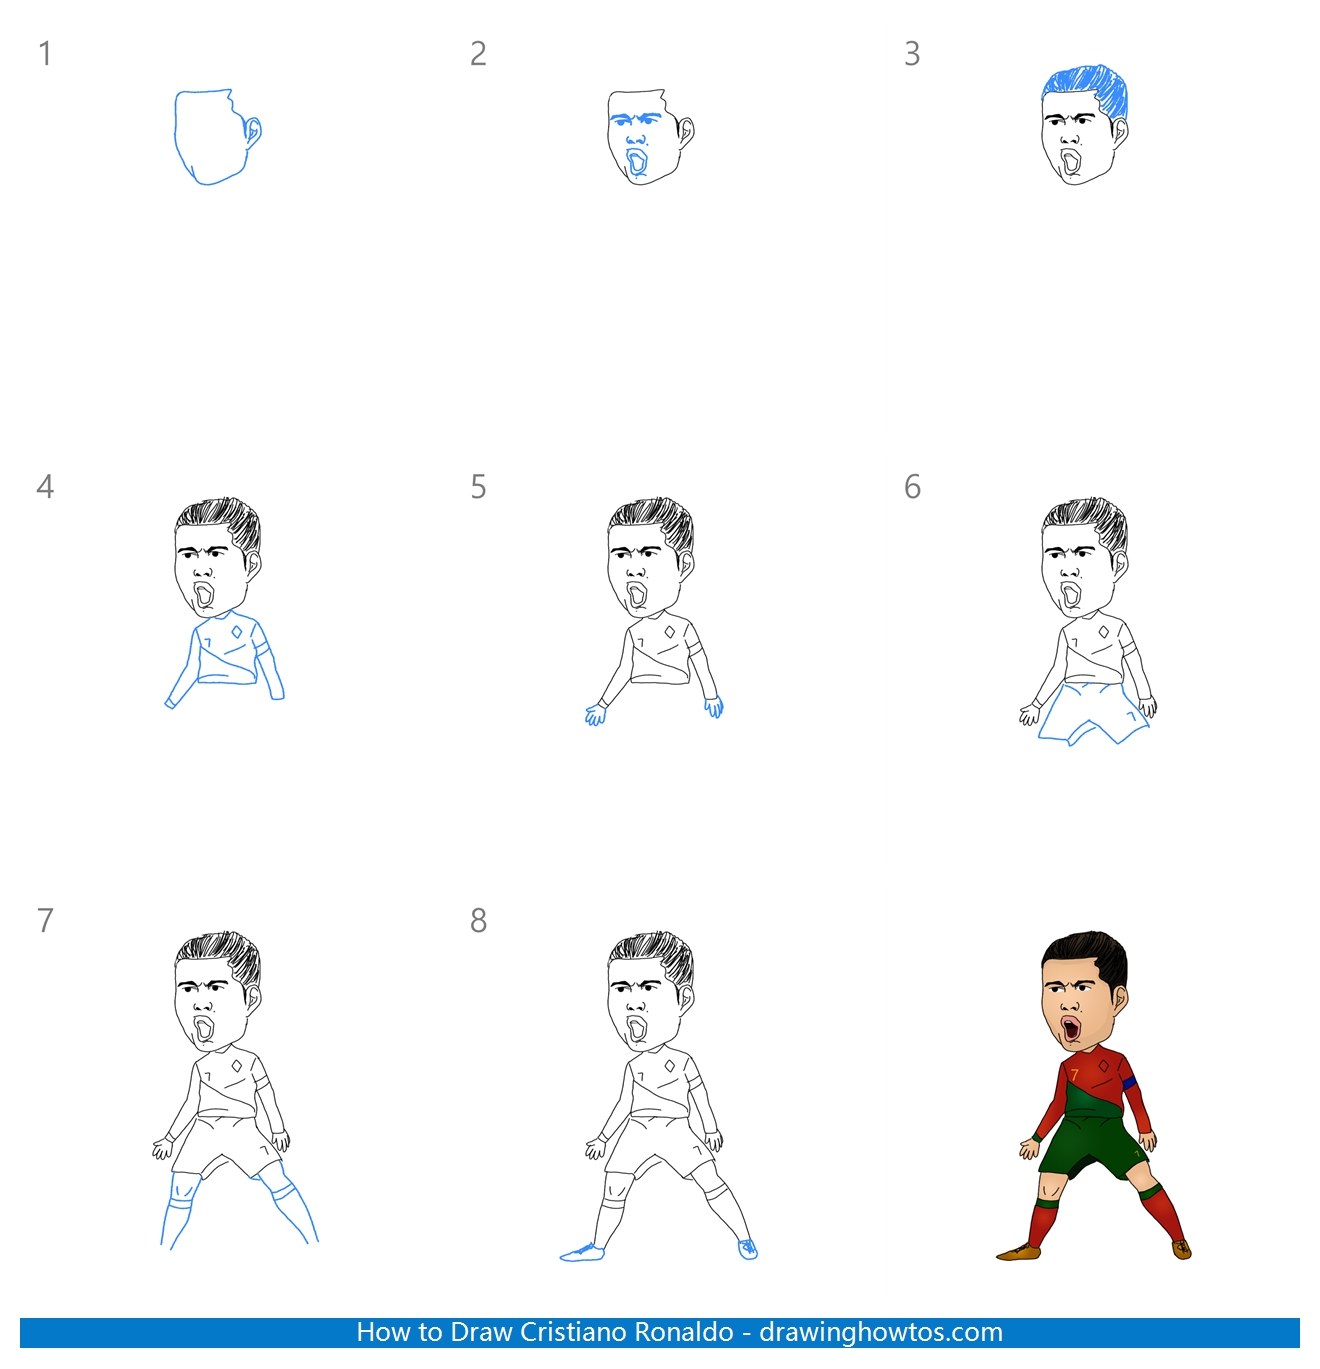 How to Draw Cristiano Ronaldo Step by Step